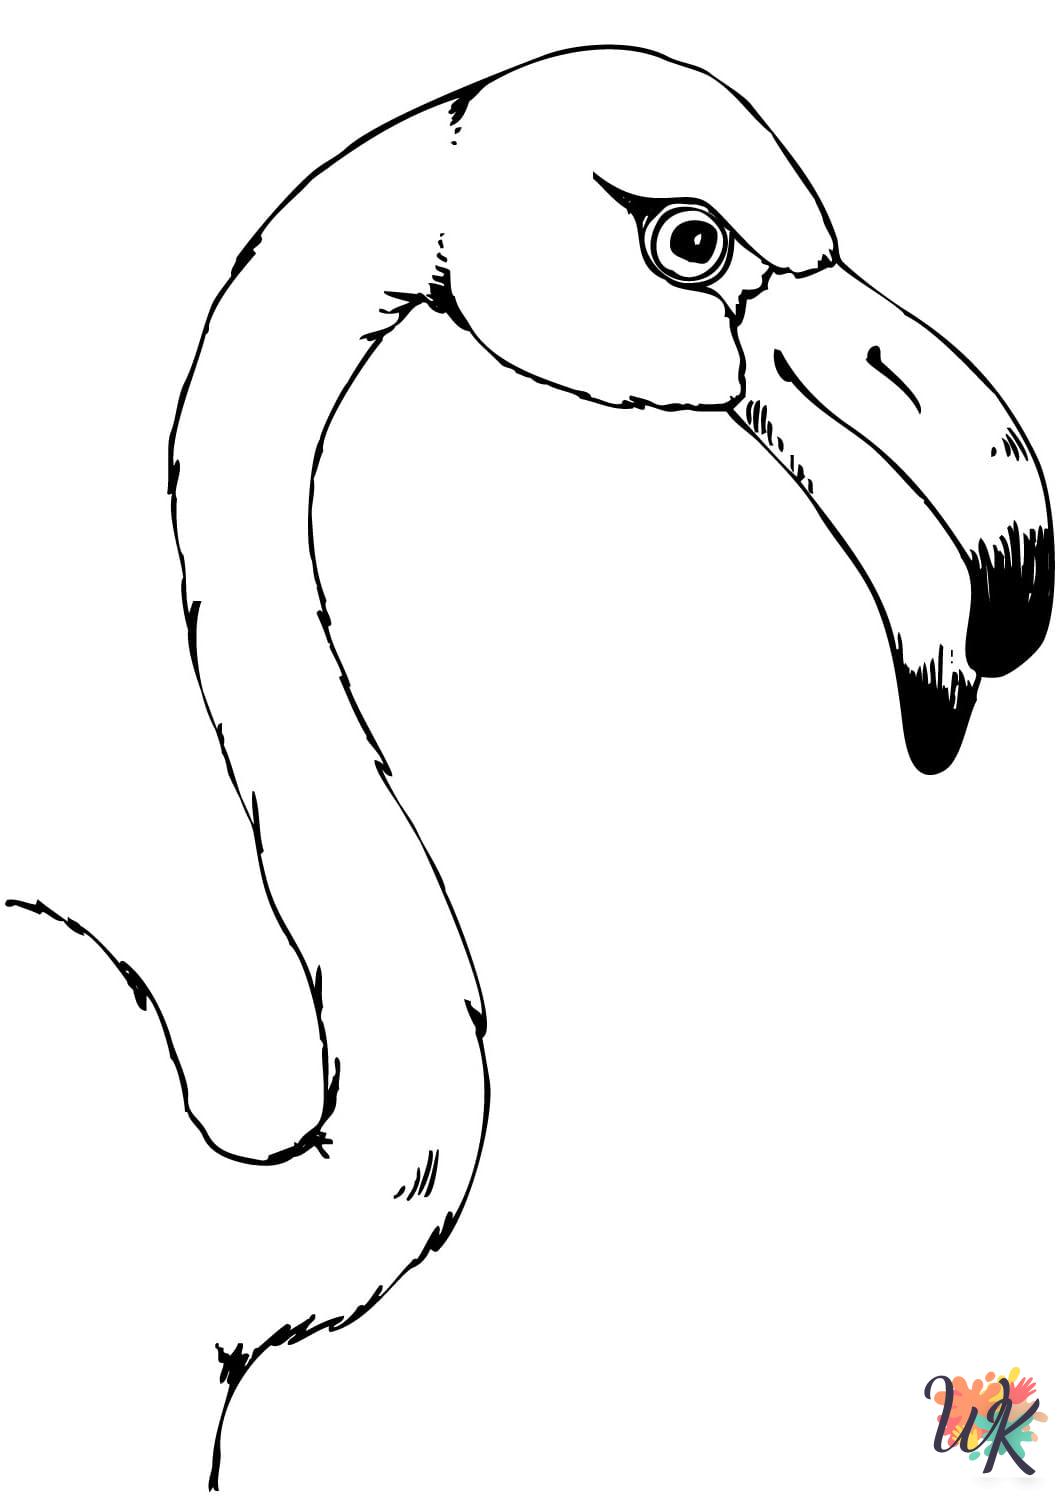 Flamingo coloring pages easy